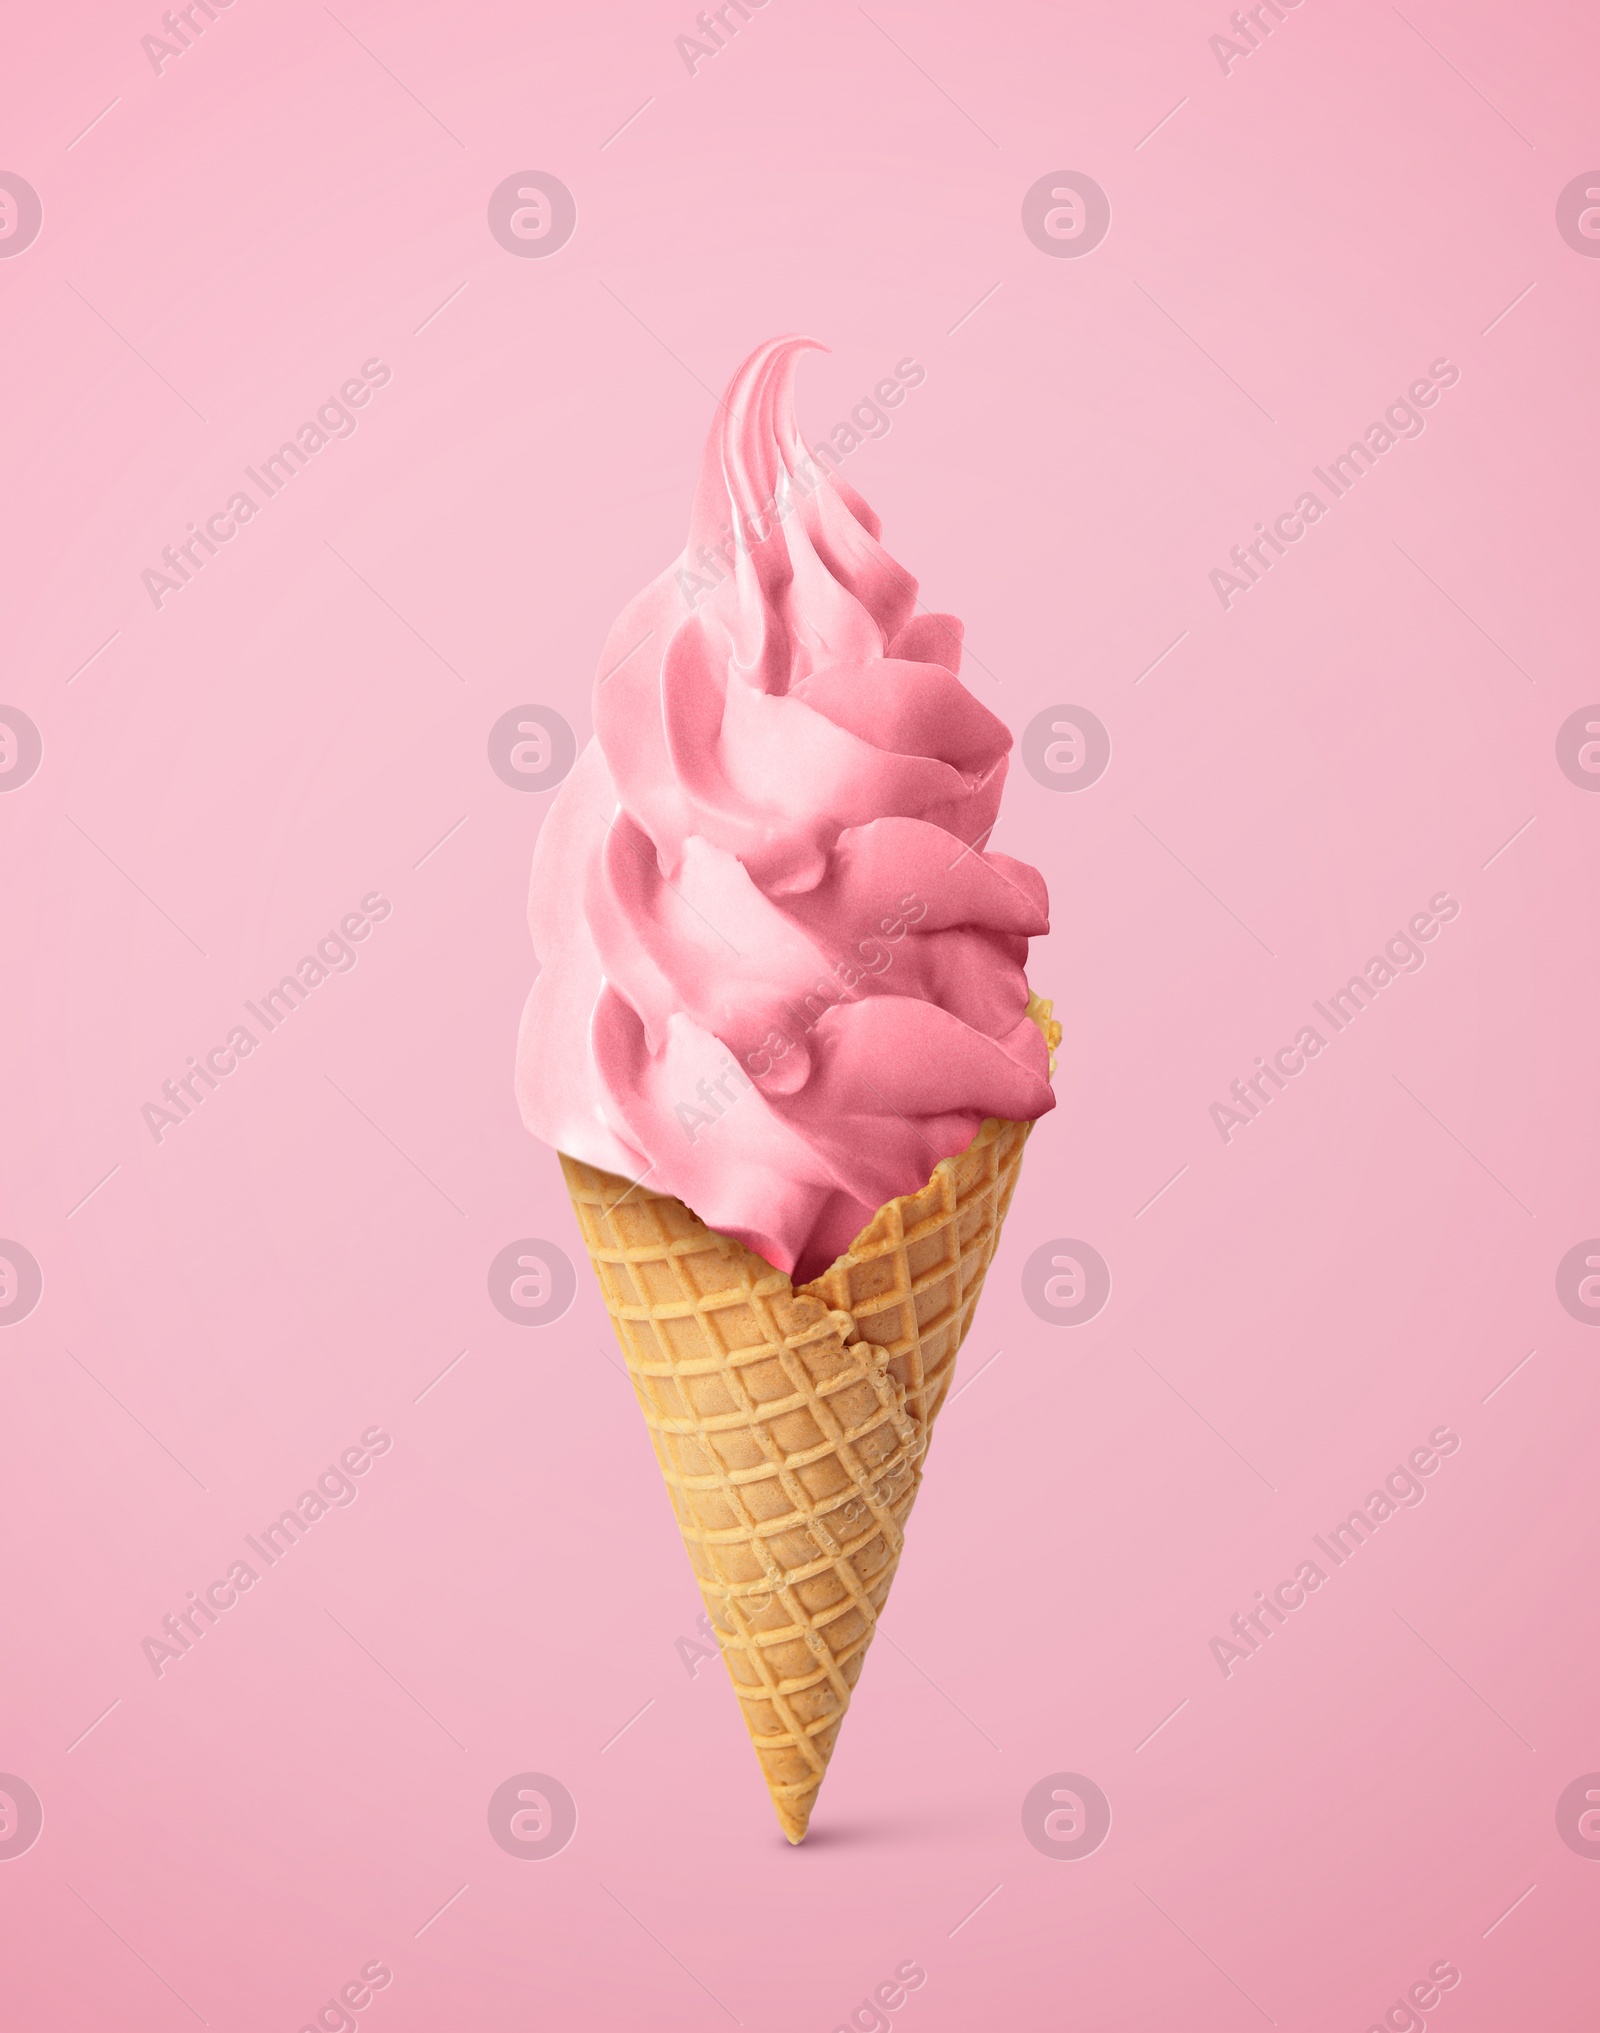 Image of Tasty raspberry or strawberry ice cream in waffle cone on pastel pink background. Soft serve